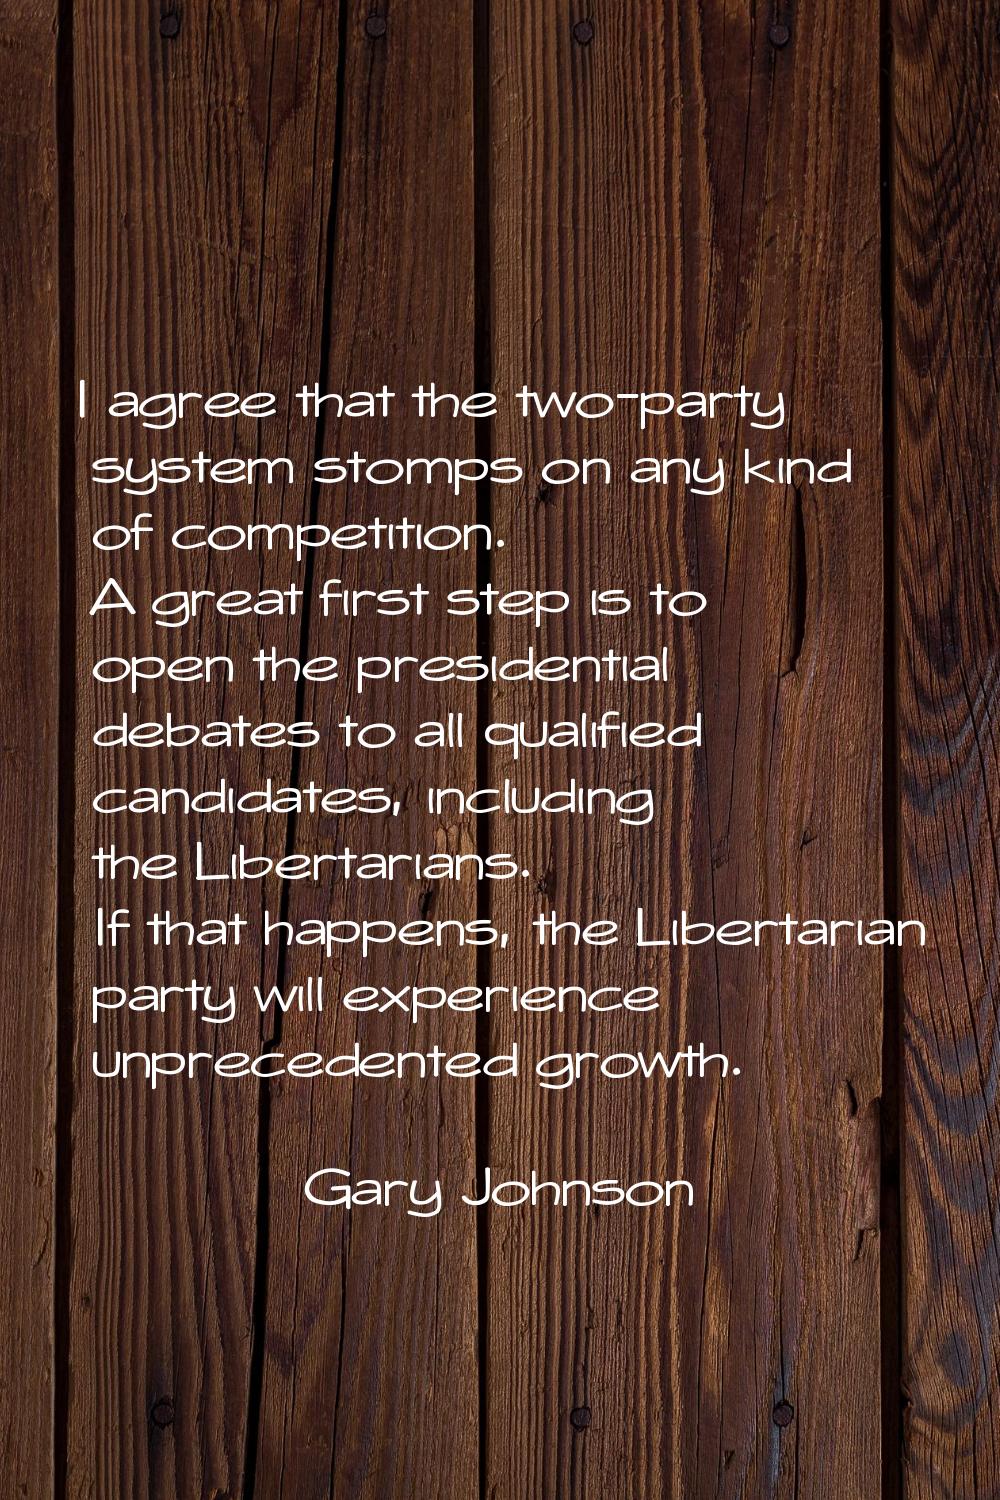 I agree that the two-party system stomps on any kind of competition. A great first step is to open 